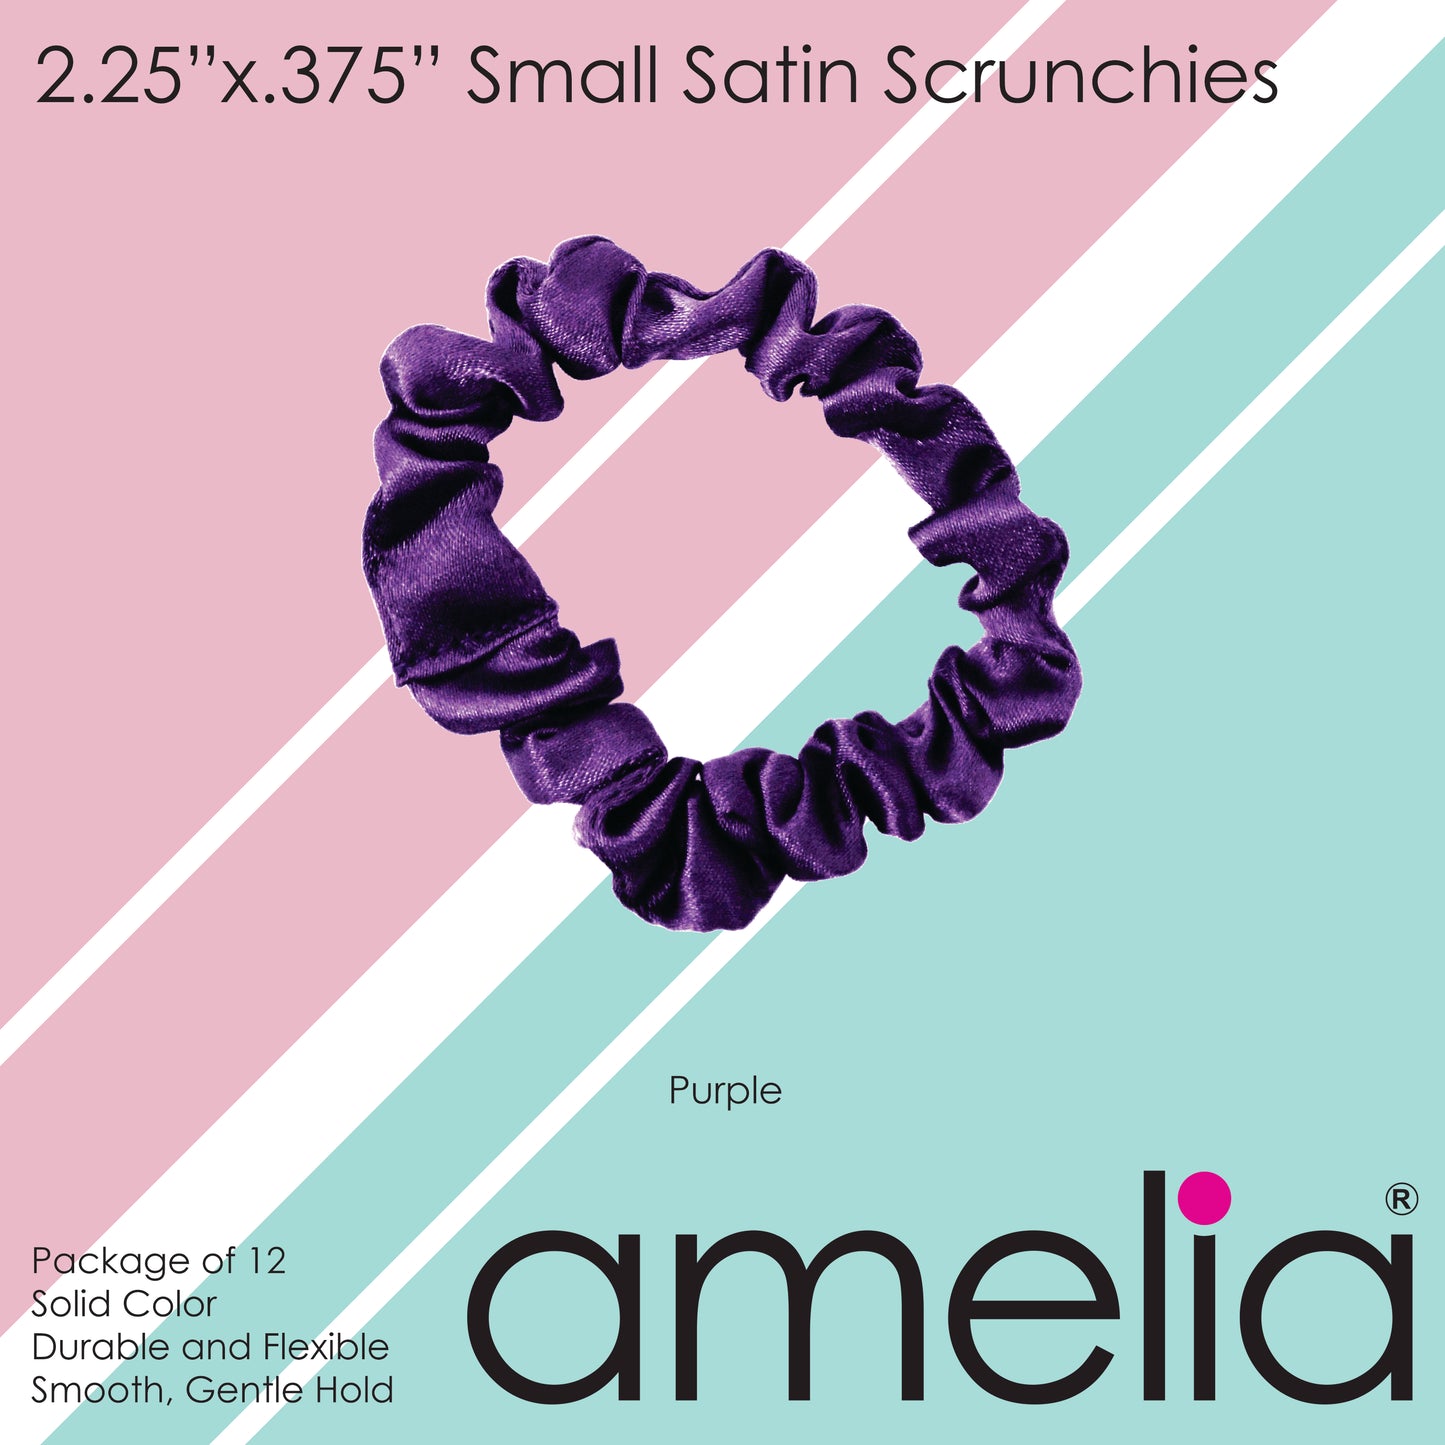 Amelia Beauty, Purple Satin Scrunchies, 2.25in Diameter, Gentle on Hair, Strong Hold, No Snag, No Dents or Creases. 12 Pack